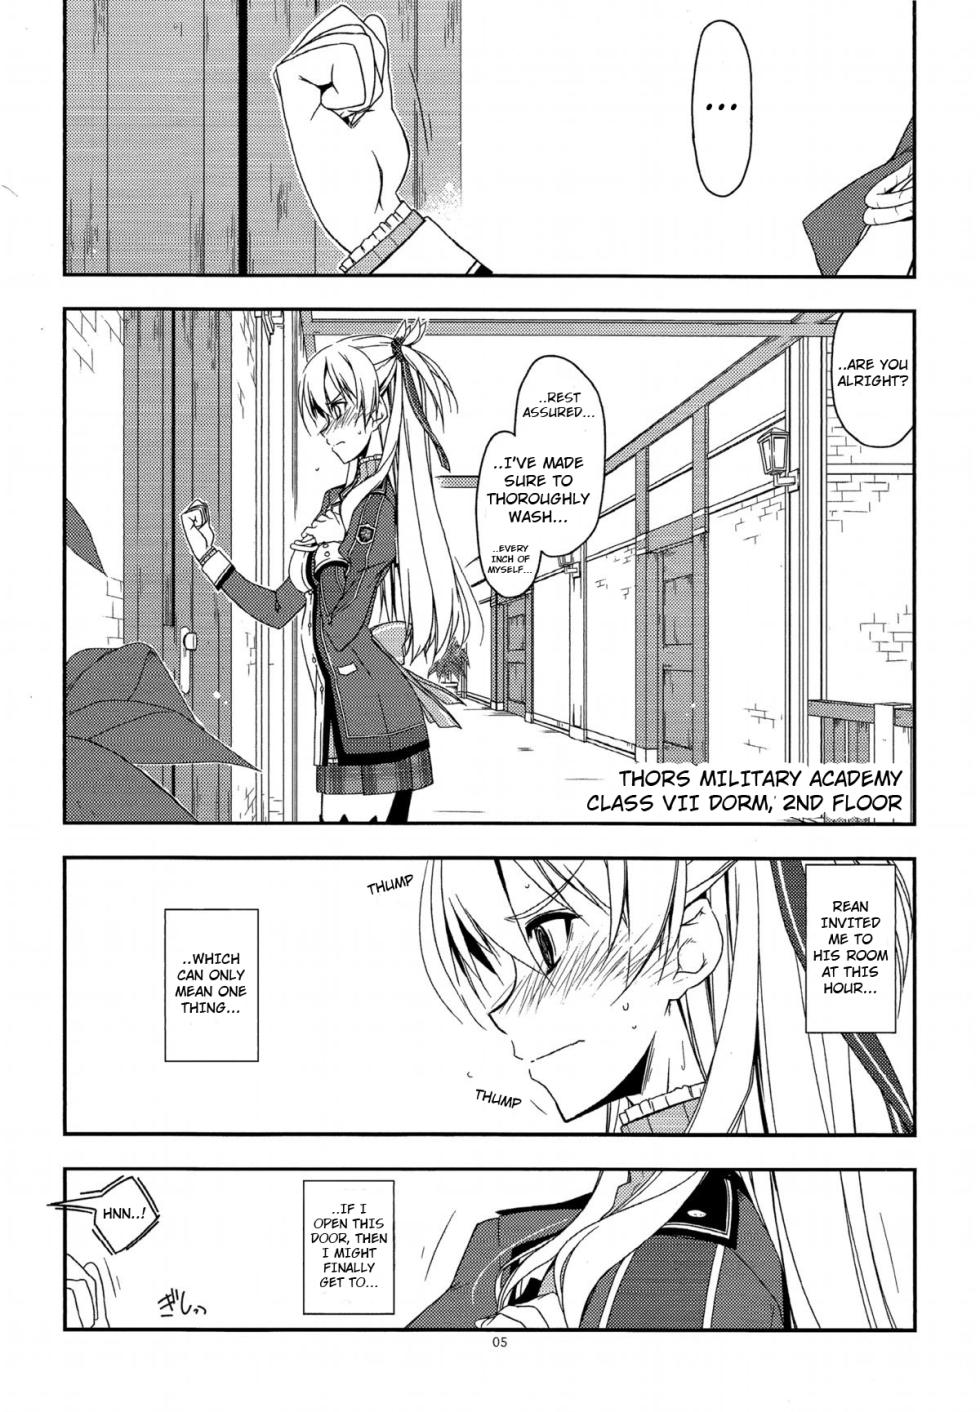 (SC65) [Angyadow (Shikei)] Alisa Ijiri 2 (The Legend of Heroes: Trails of Cold Steel) [English] [ctx12nz] - Page 4